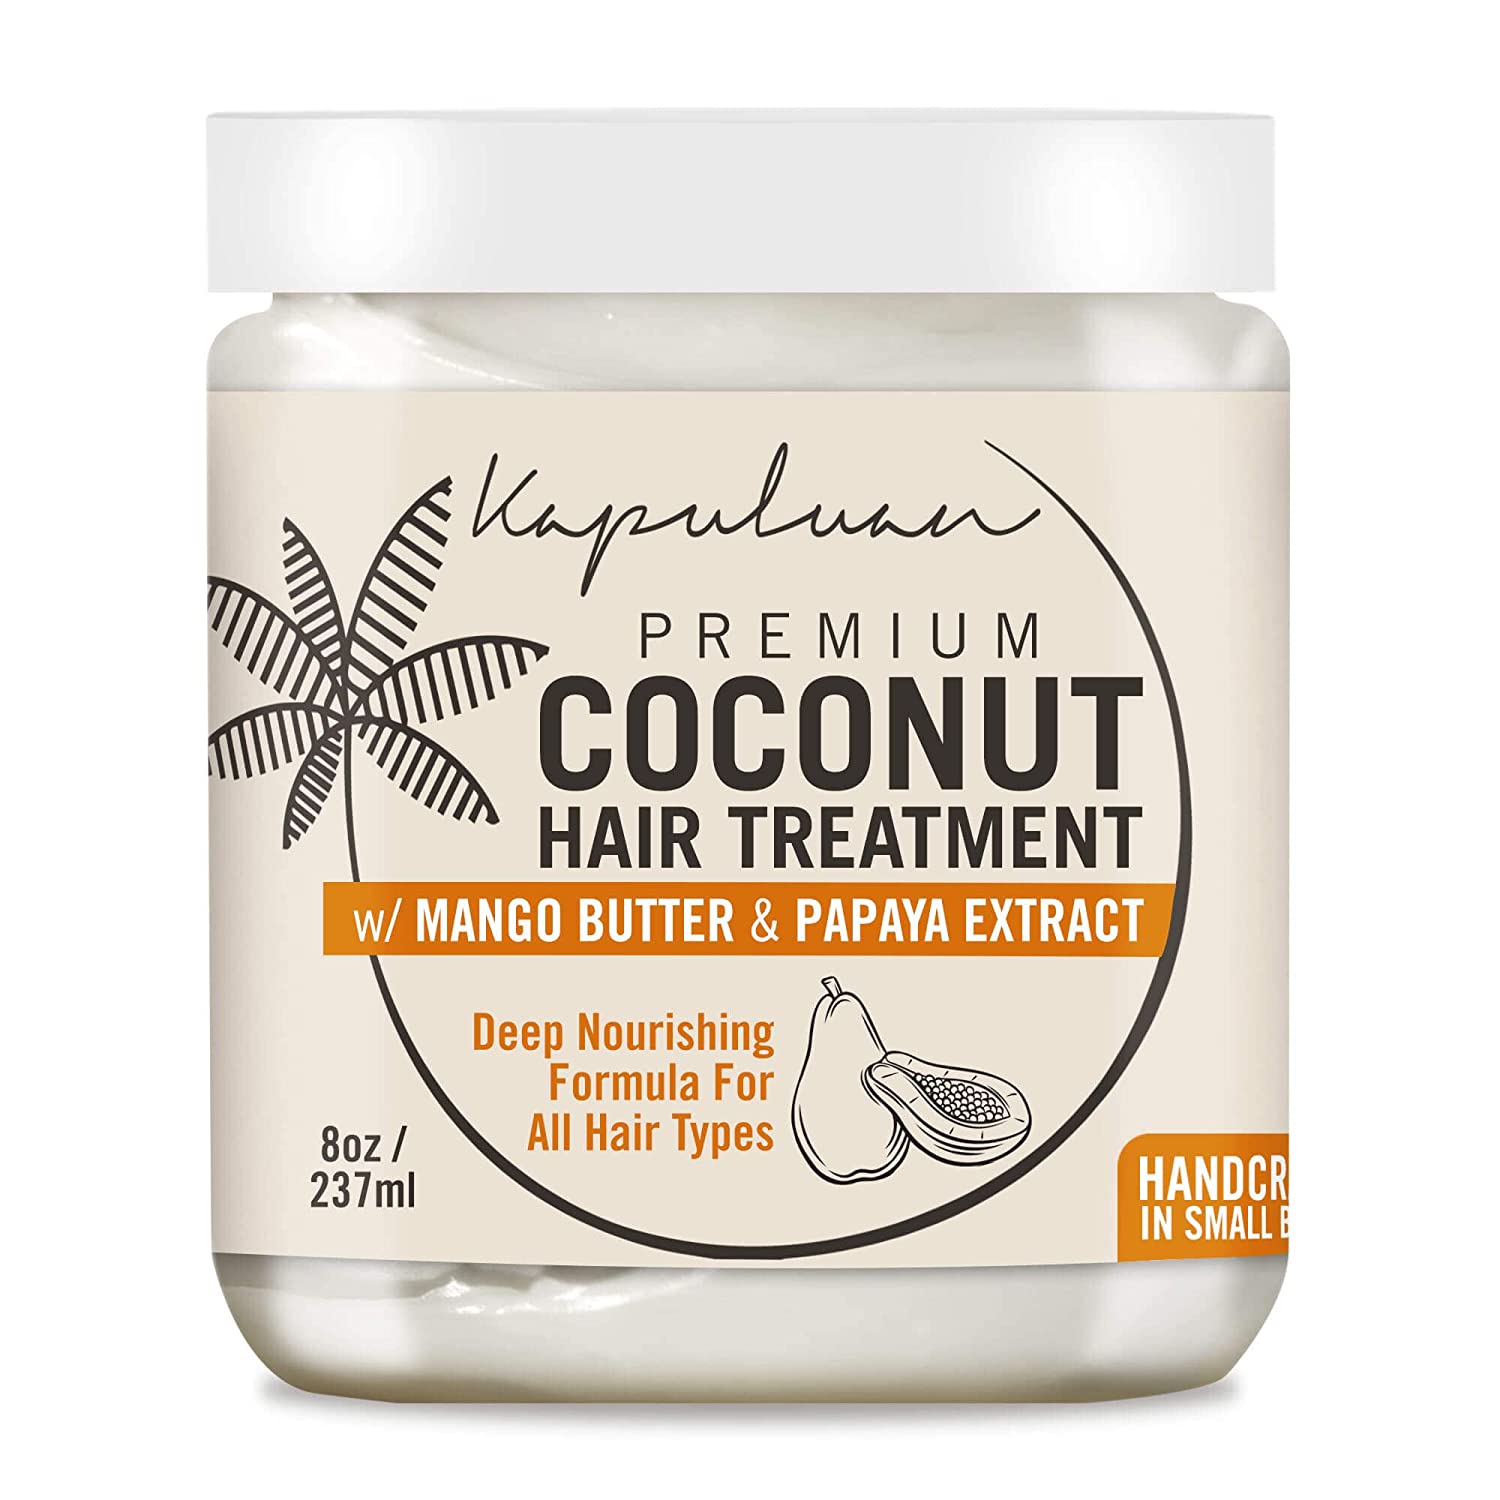 A jar of premium coconut hair treatment with mango butter and papaya extract, 8 ounces, boasting deep nourishment for all hair types.